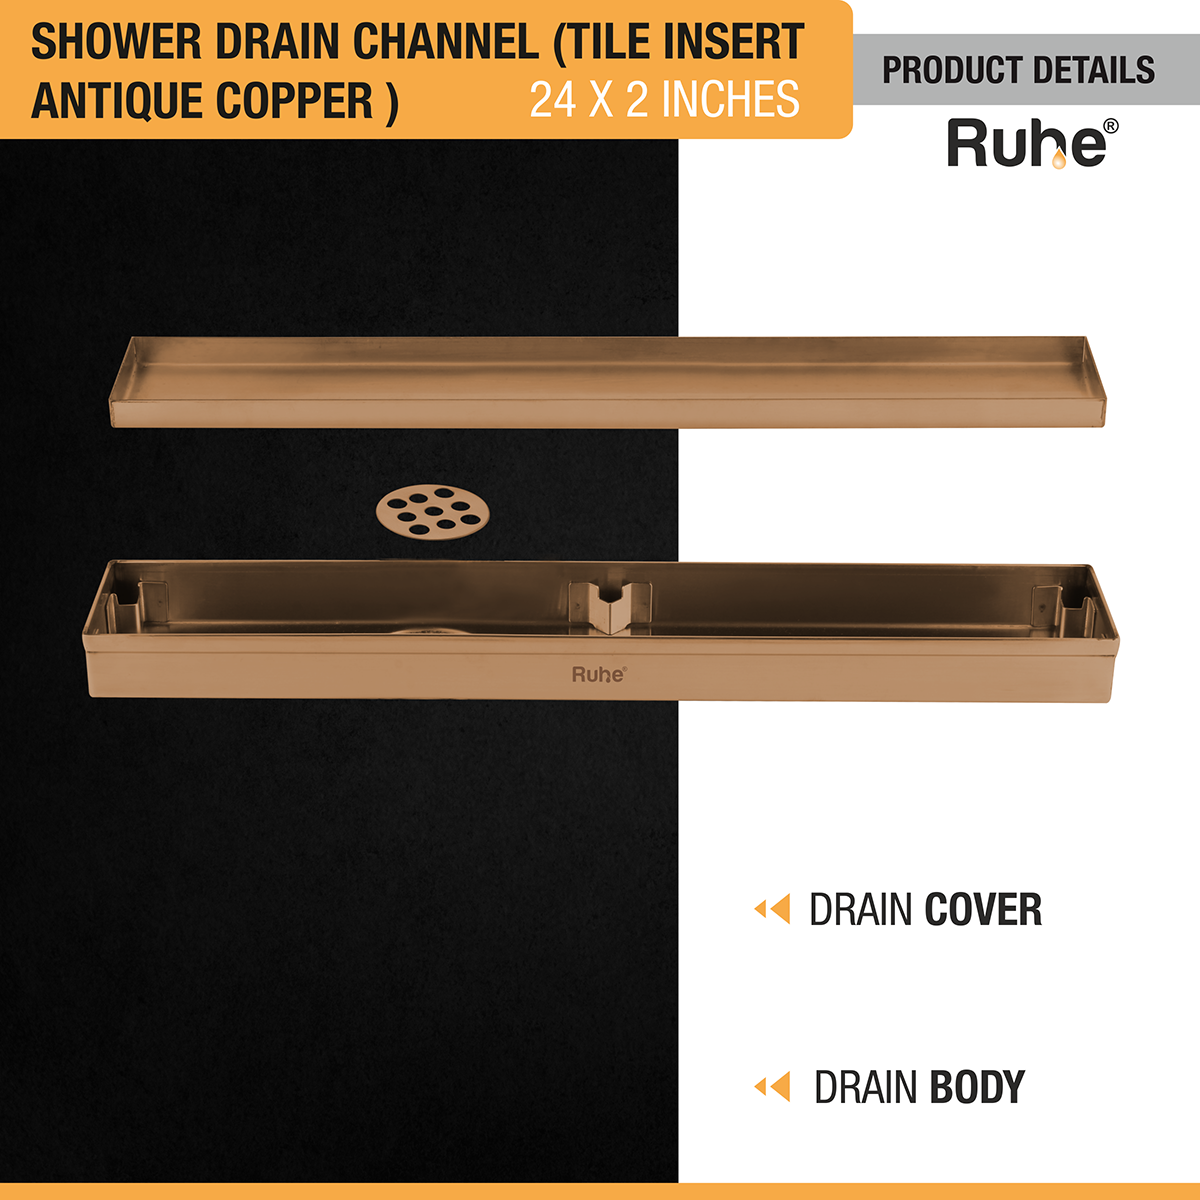 Marble Insert Shower Drain Channel (24 x 2 Inches) ROSE GOLD PVD Coated with drain cover and drain body